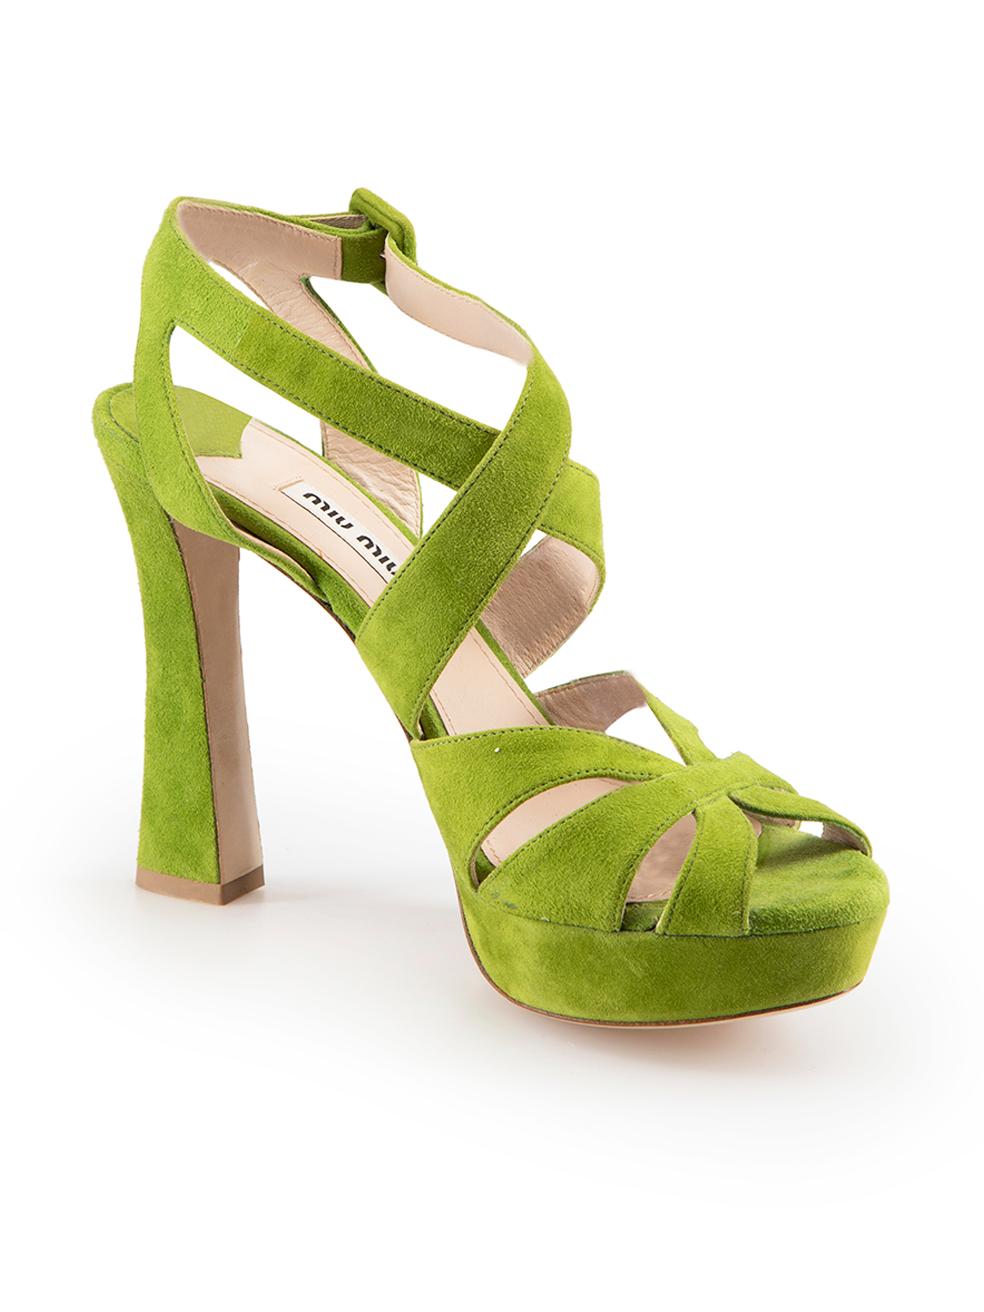 CONDITION is Very good. Minimal wear to heels is evident. Minimal wear to suede surface with some very light discolouration and abrasion to the pile found throughout on this used Miu Miu designer resale item.

Details
Green
Suede
Strappy